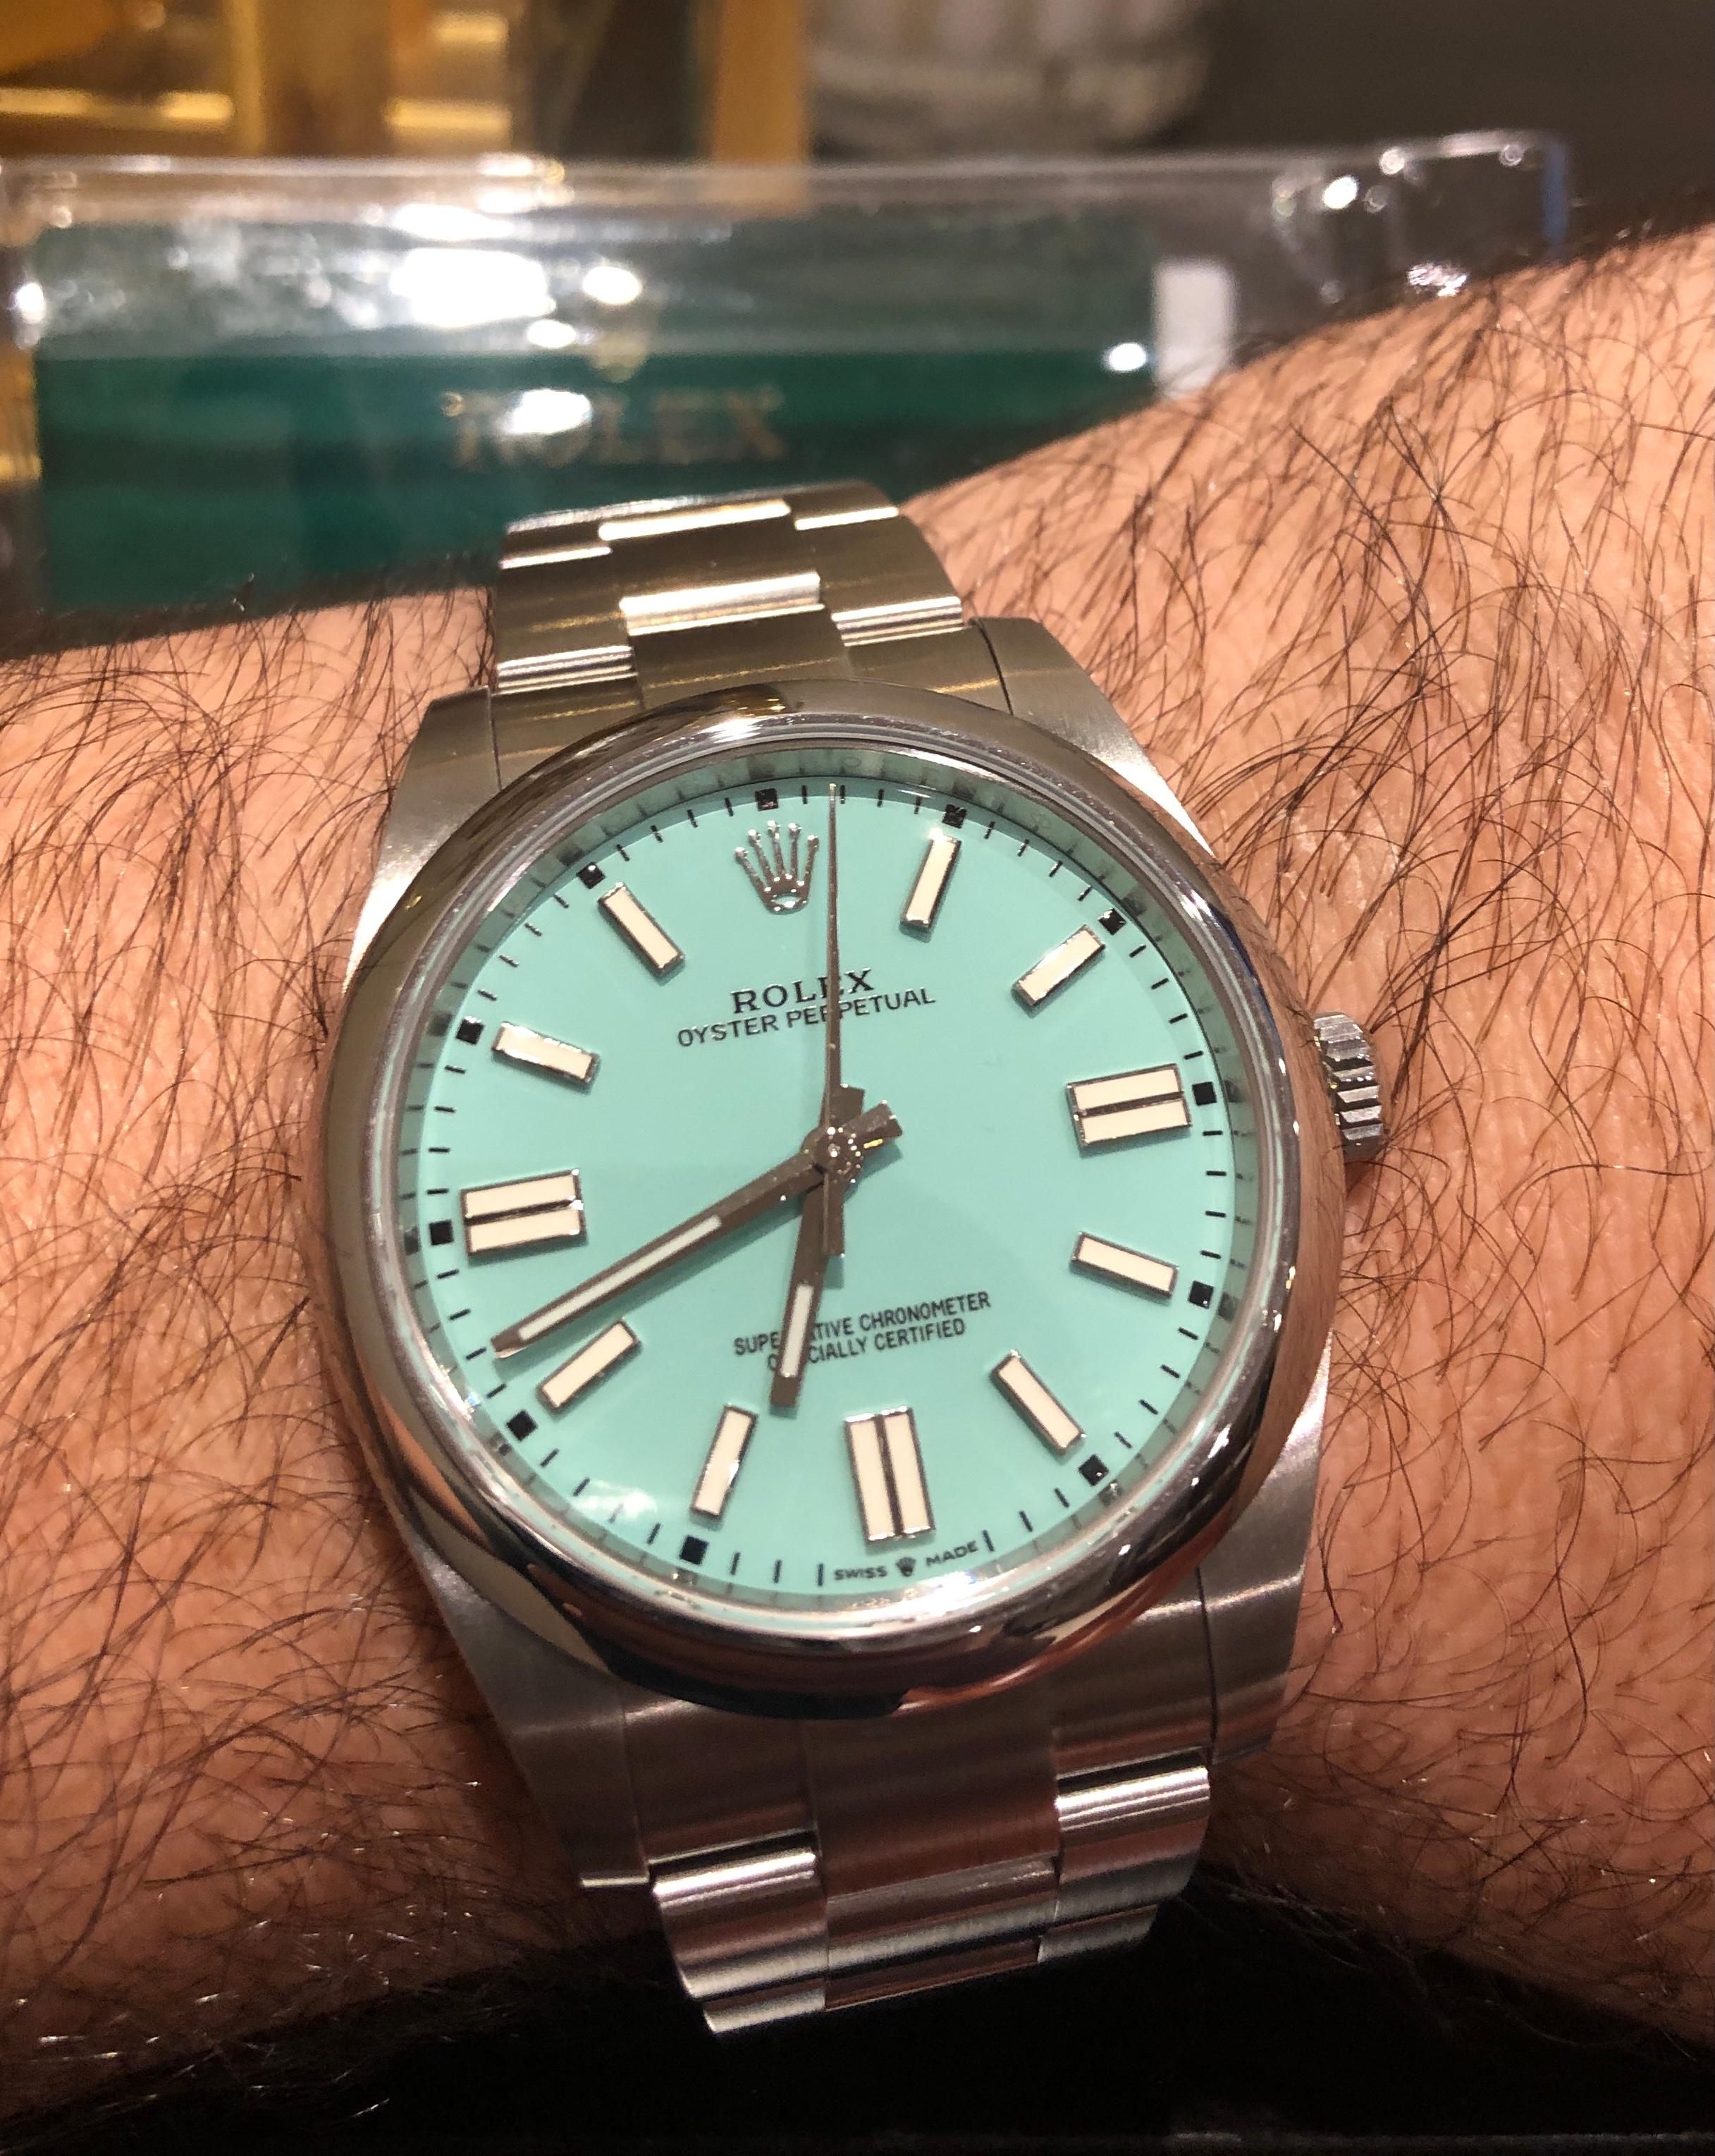 Rolex Oyster Perpetual 41mm Turquoise Oyster Watch 124300

Dial color was changed to turquoise, dial not original

100% authentic Rolex

comes with Box and Card

shop with confidence
